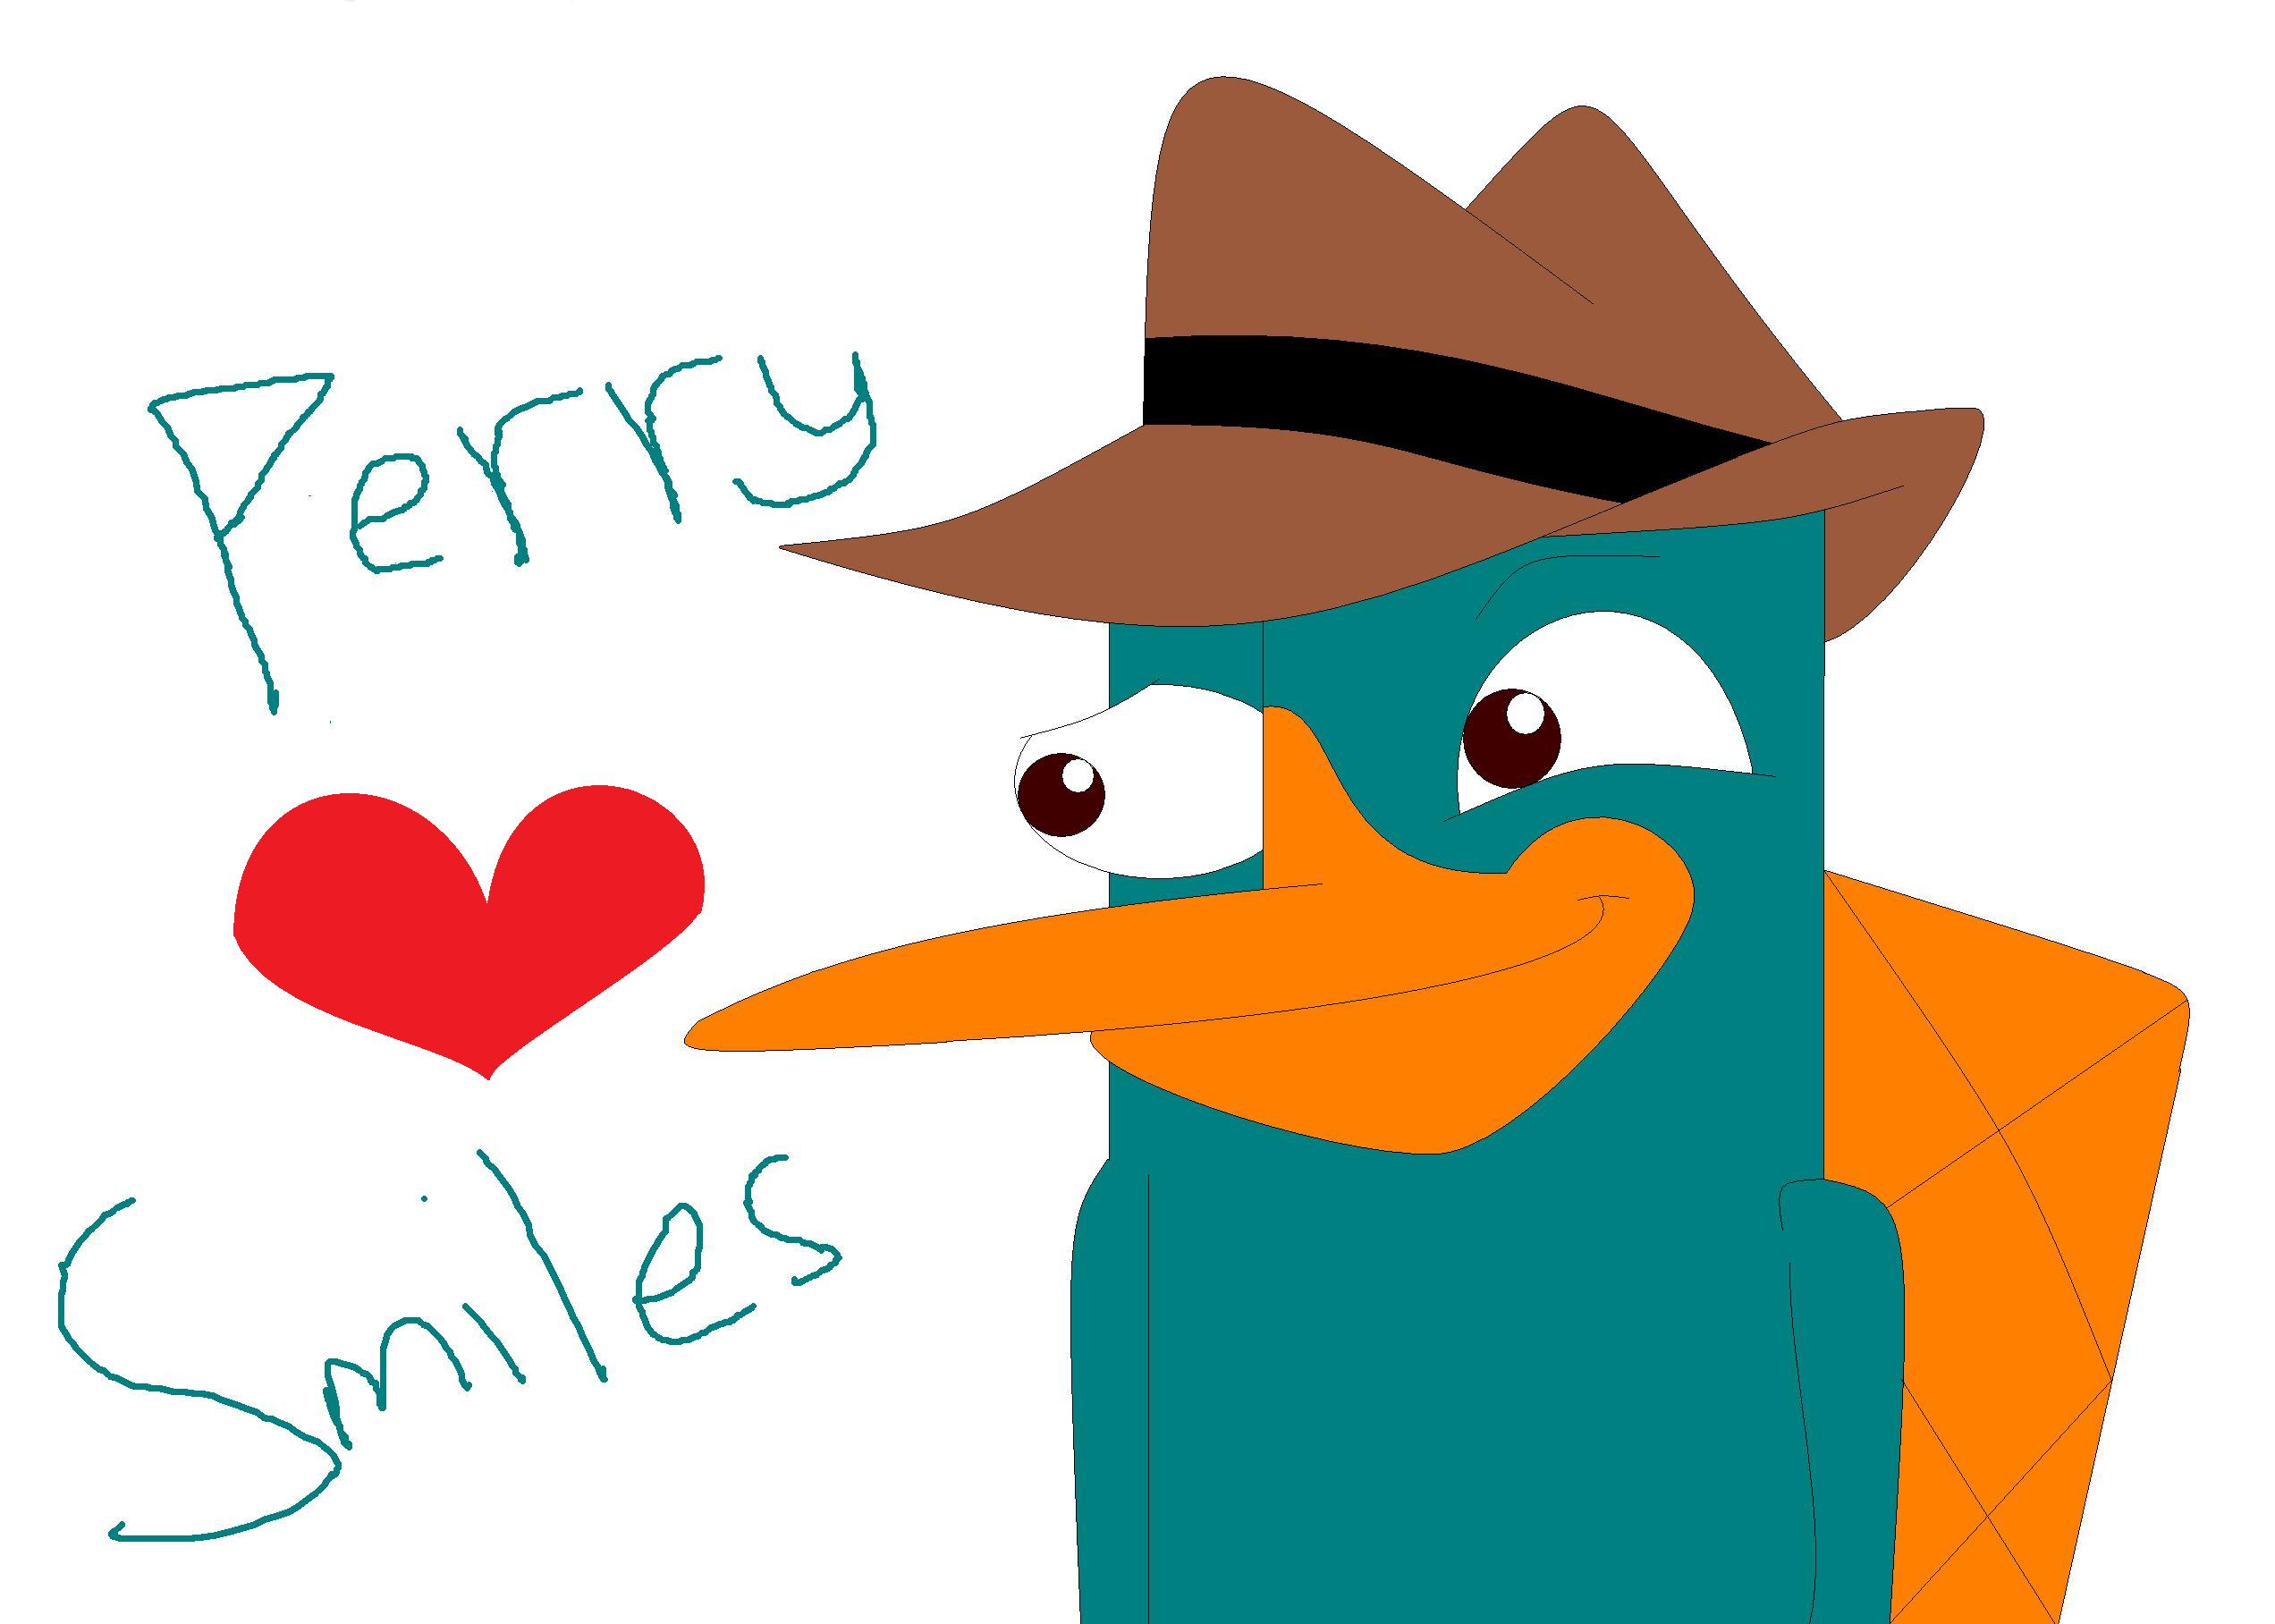 Fan Art of Perry for fans of Perry the Platypus. 